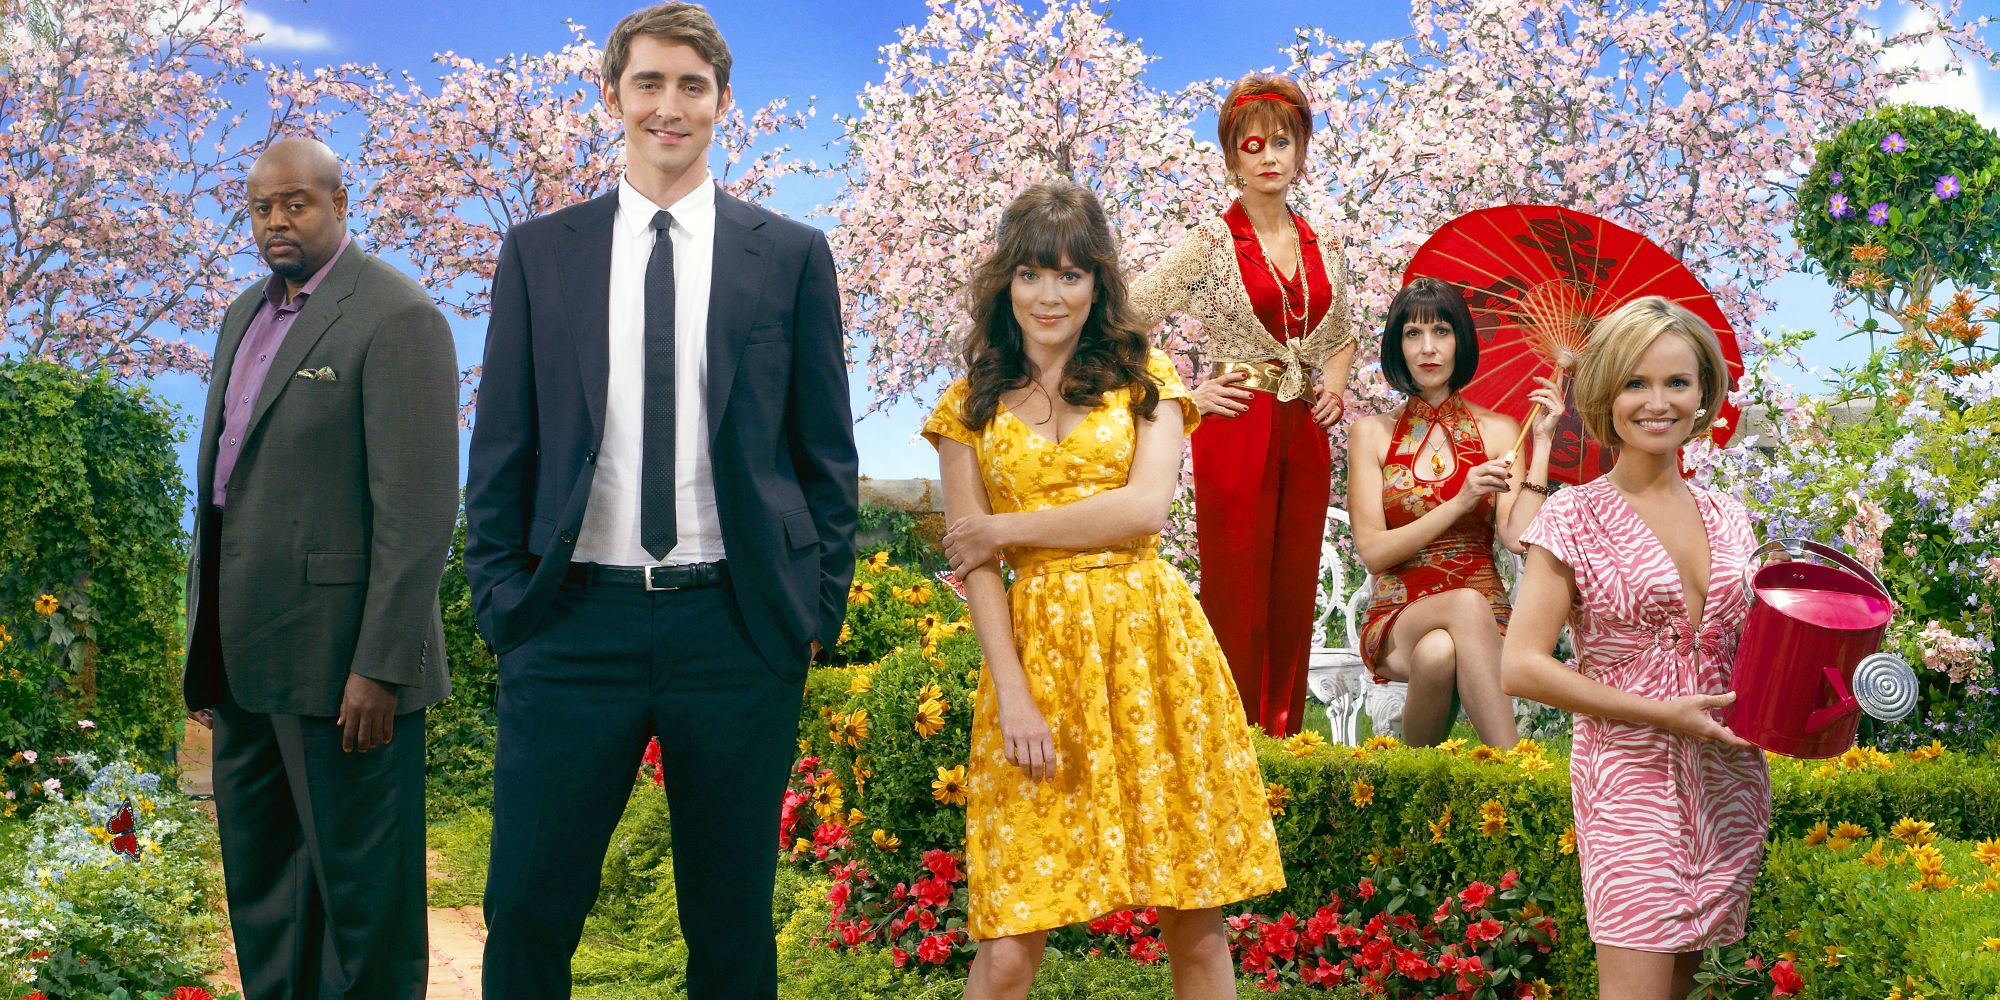 Cast of Pushing Daisies in a garden